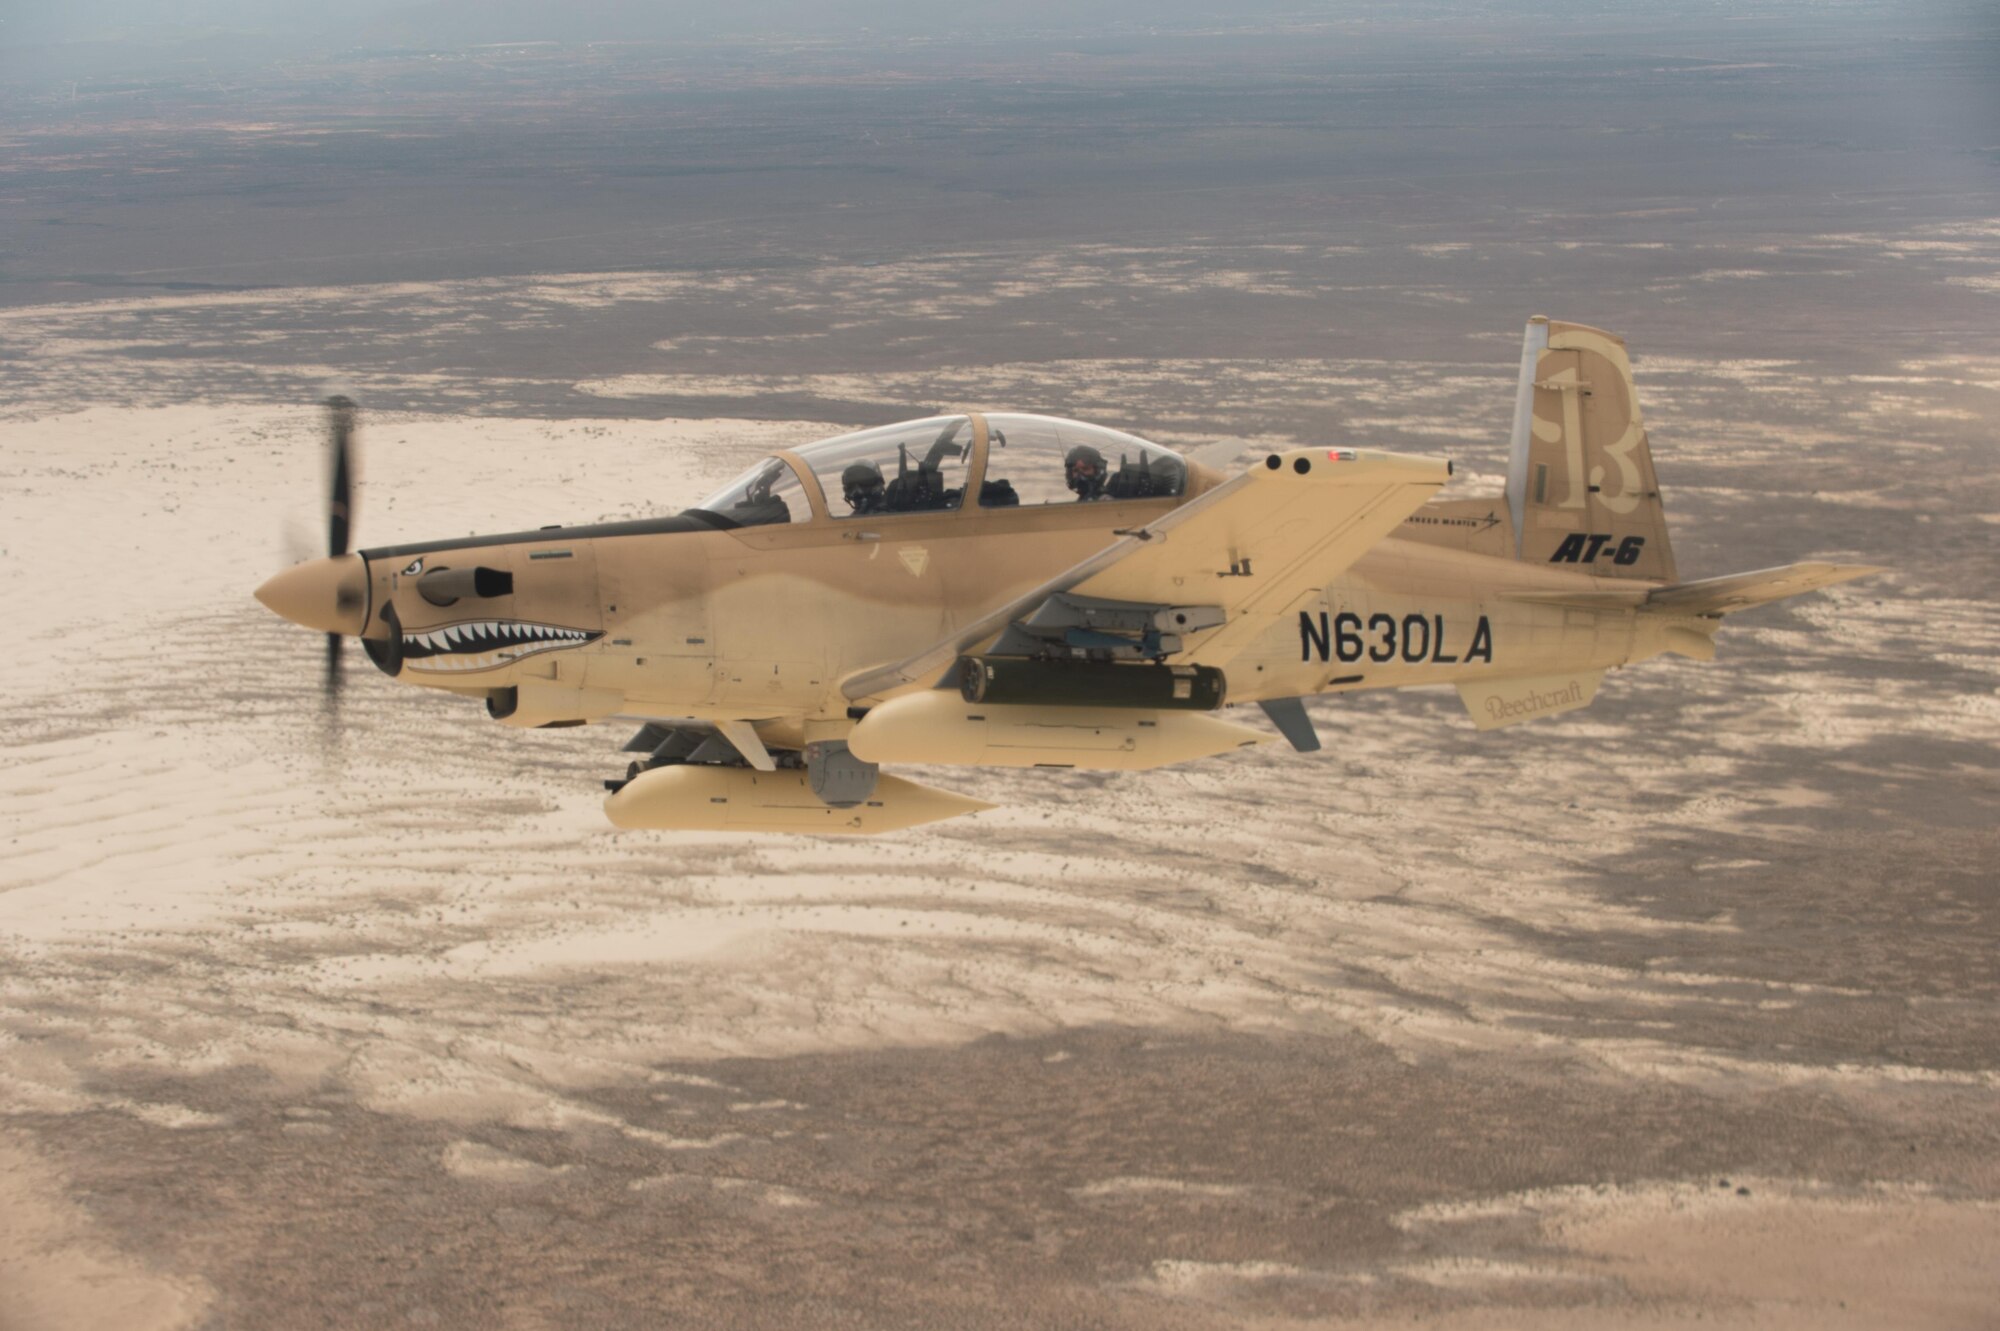 A Beechcraft AT-6 experimental aircraft flies over White Sands Missile Range, New Mexico, July 31. The AT-6 is participating in the U.S. Air Force Light Attack Experiment (OA-X), a series of trials to determine the feasibility of using light aircraft in attack roles. (U.S. Air Force photo by Ethan Wagner)